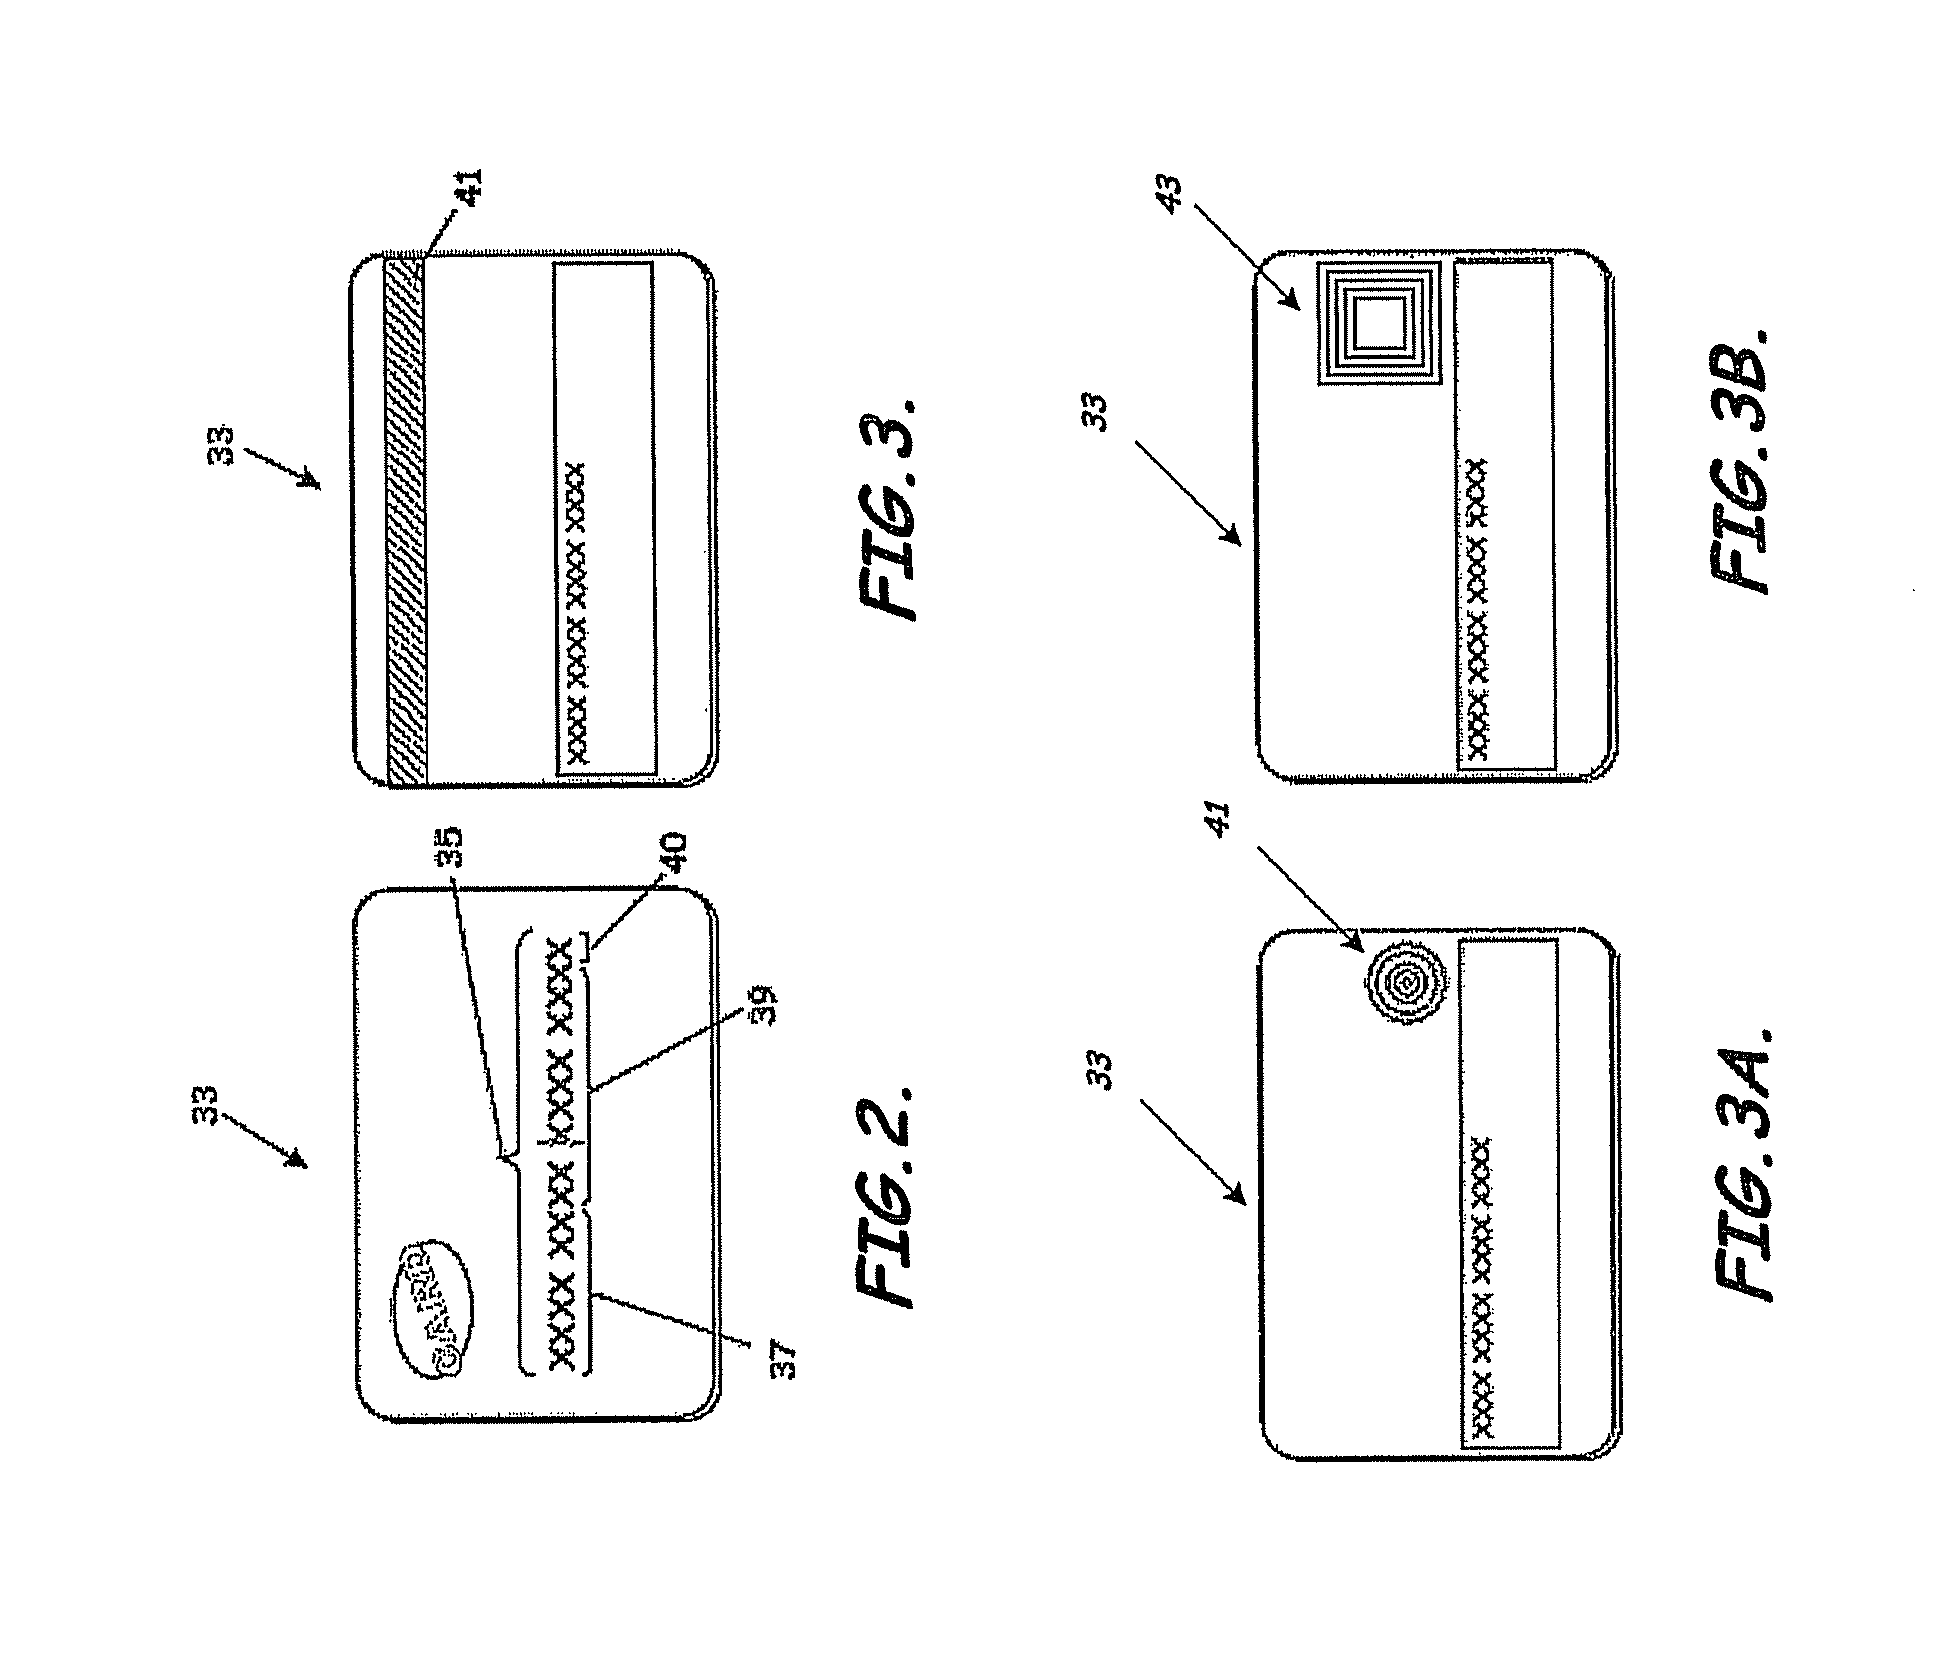 Machine, methods, and program product for electronic order entry